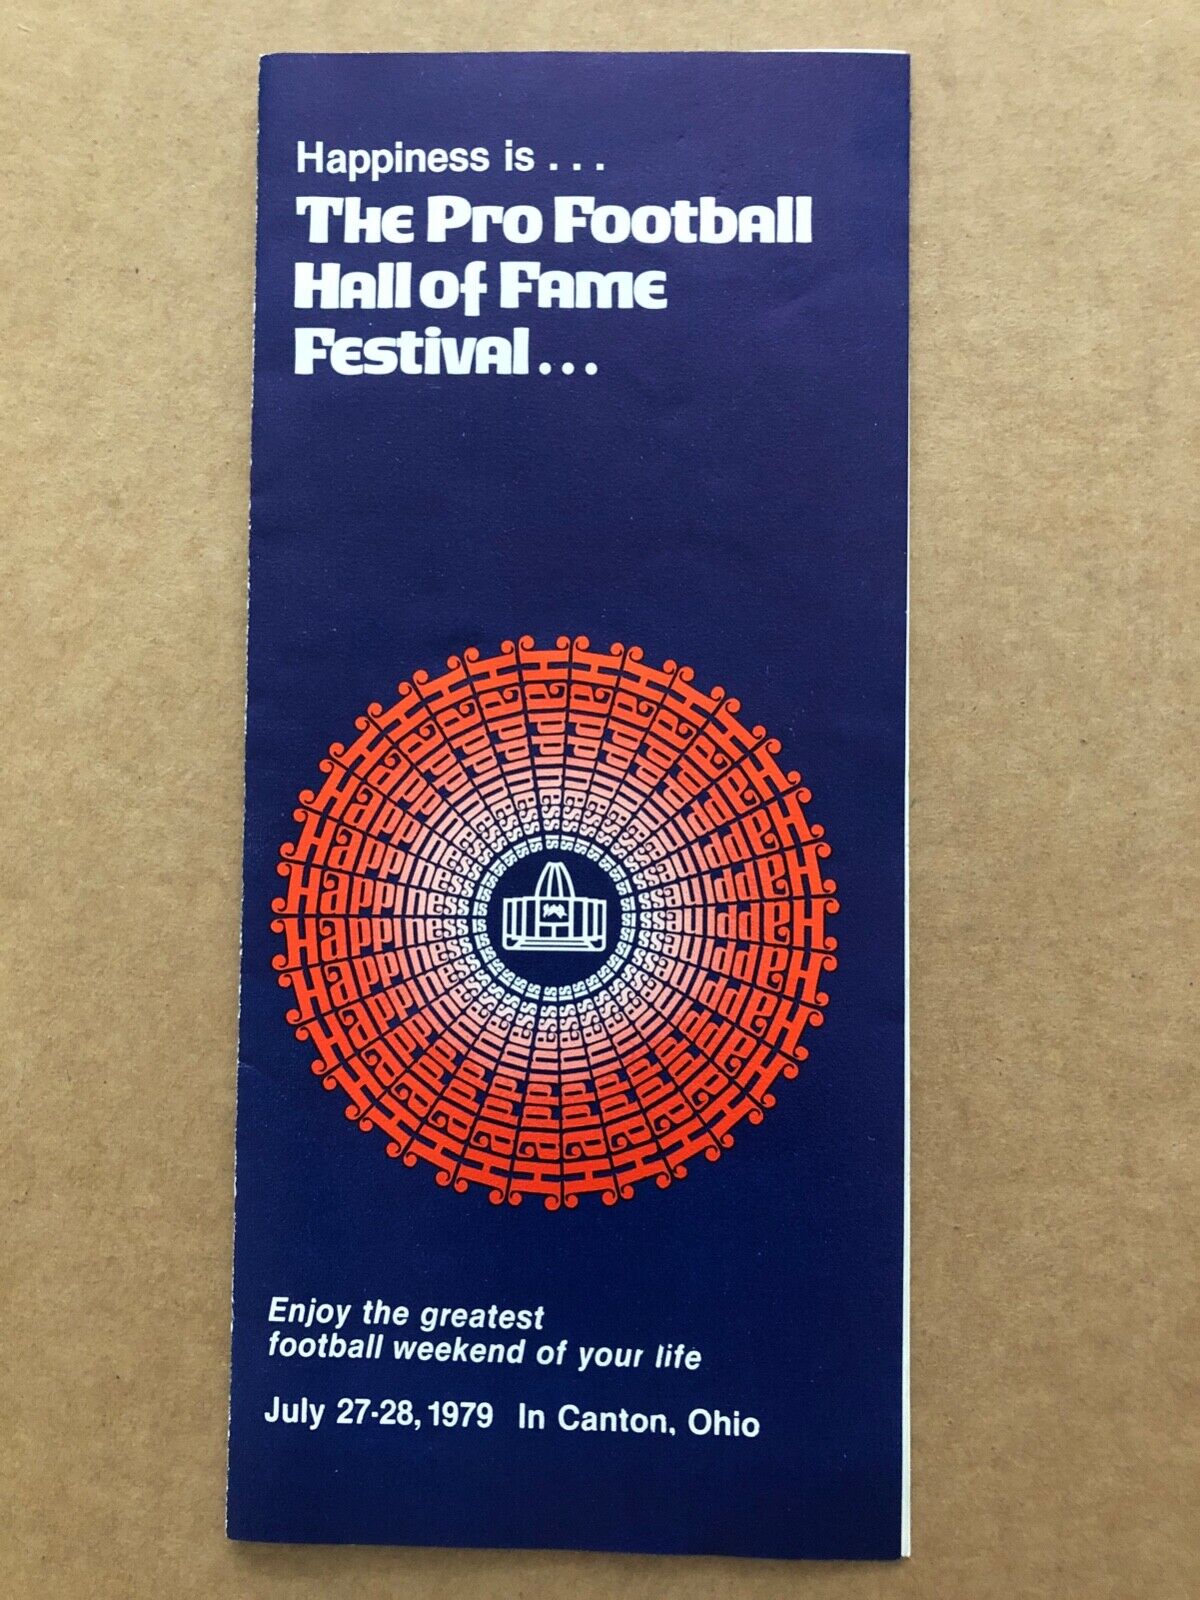 Vintage 1979 PRO FOOTBALL HALL OF FAME HOF Festival Pamphlet Happiness is  Canton